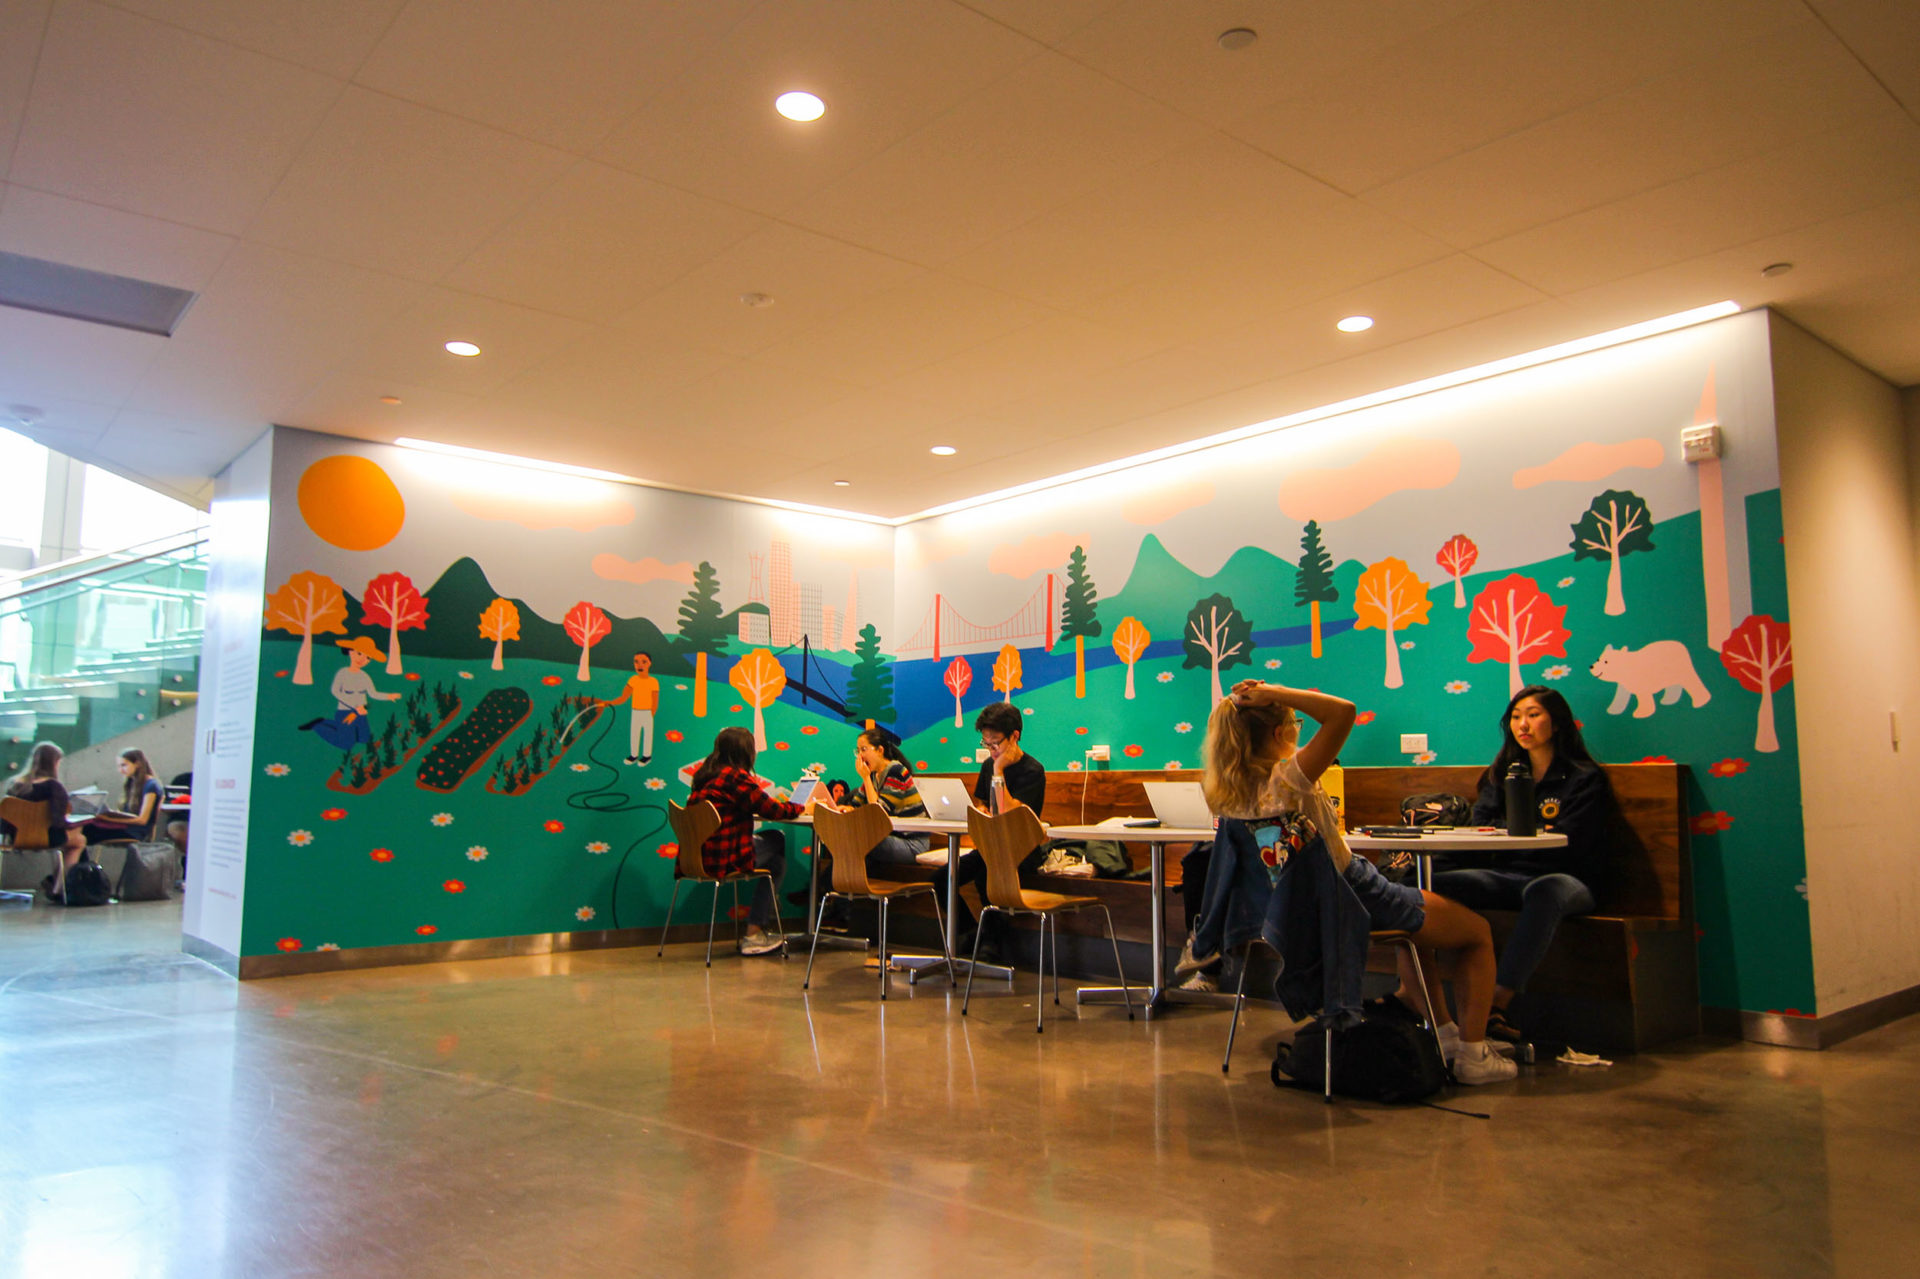 "Locally Grown" is a mural in the dining room at the ASUC Student Union on the UC Berkeley campus.